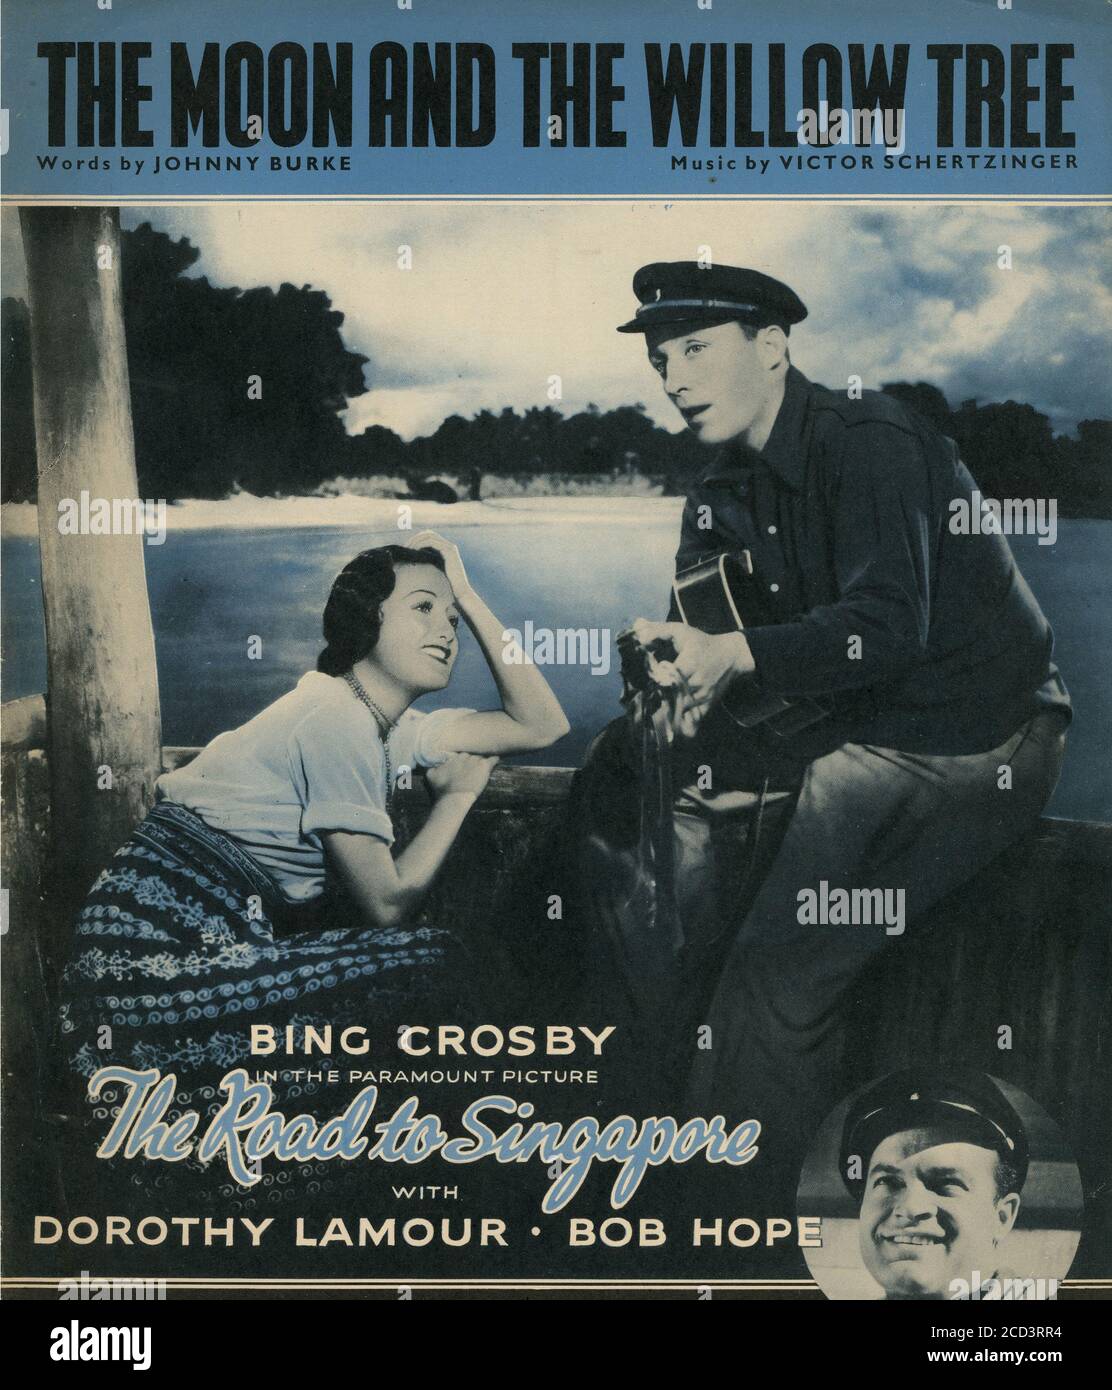 Sheet Music - The Moon and the Willow Tree - Bing Crosby - 1940 Stock Photo